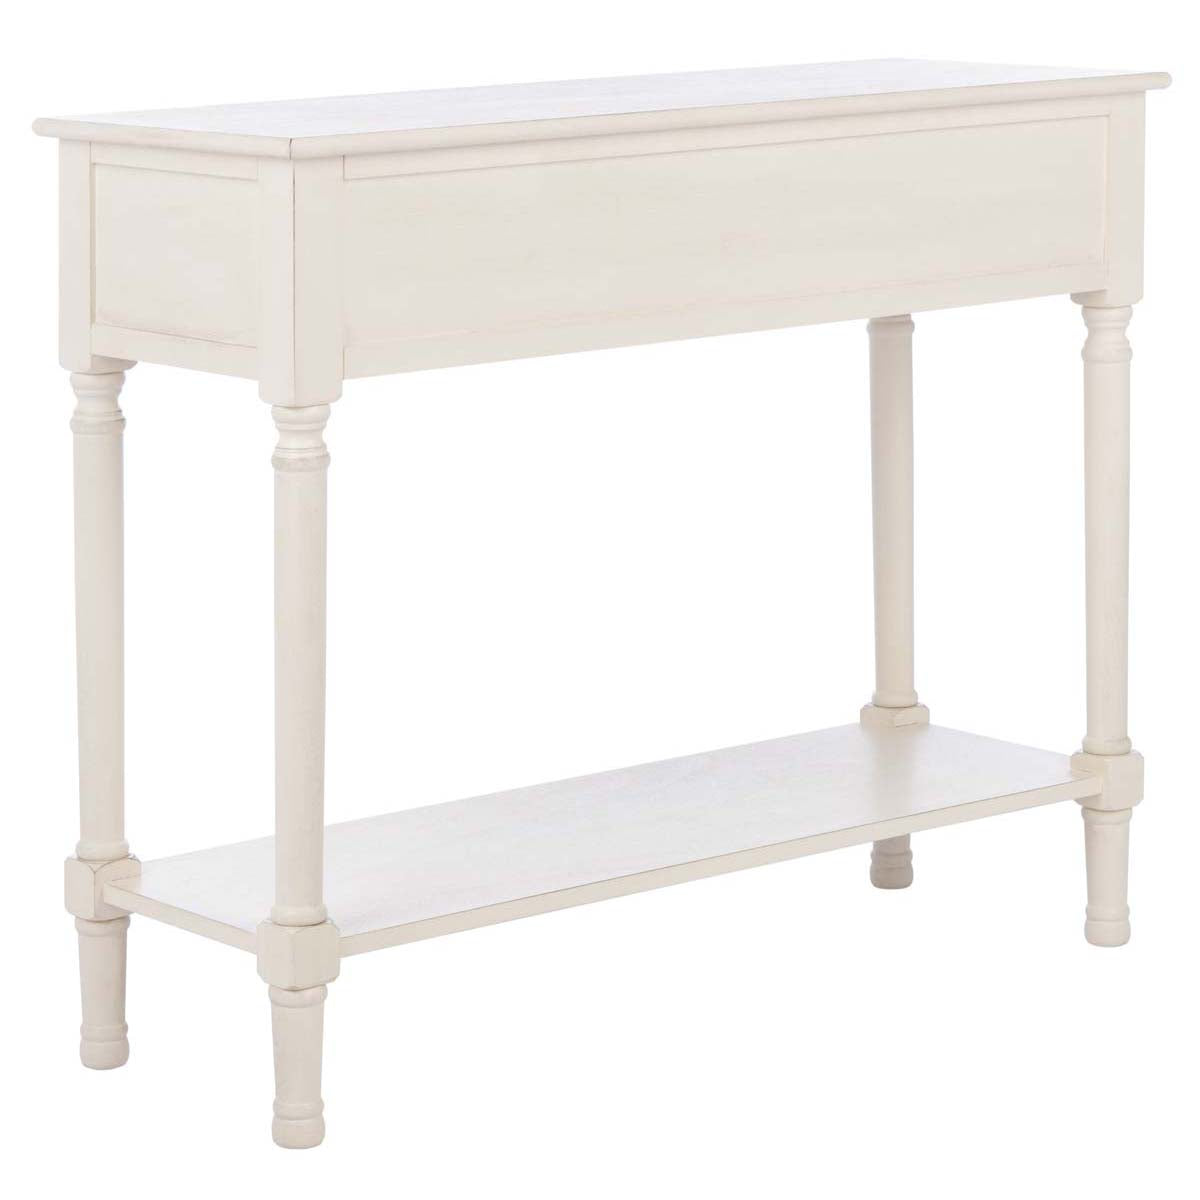 Safavieh Ryder 2Drw Console Table , CNS5719 - Distressed / White